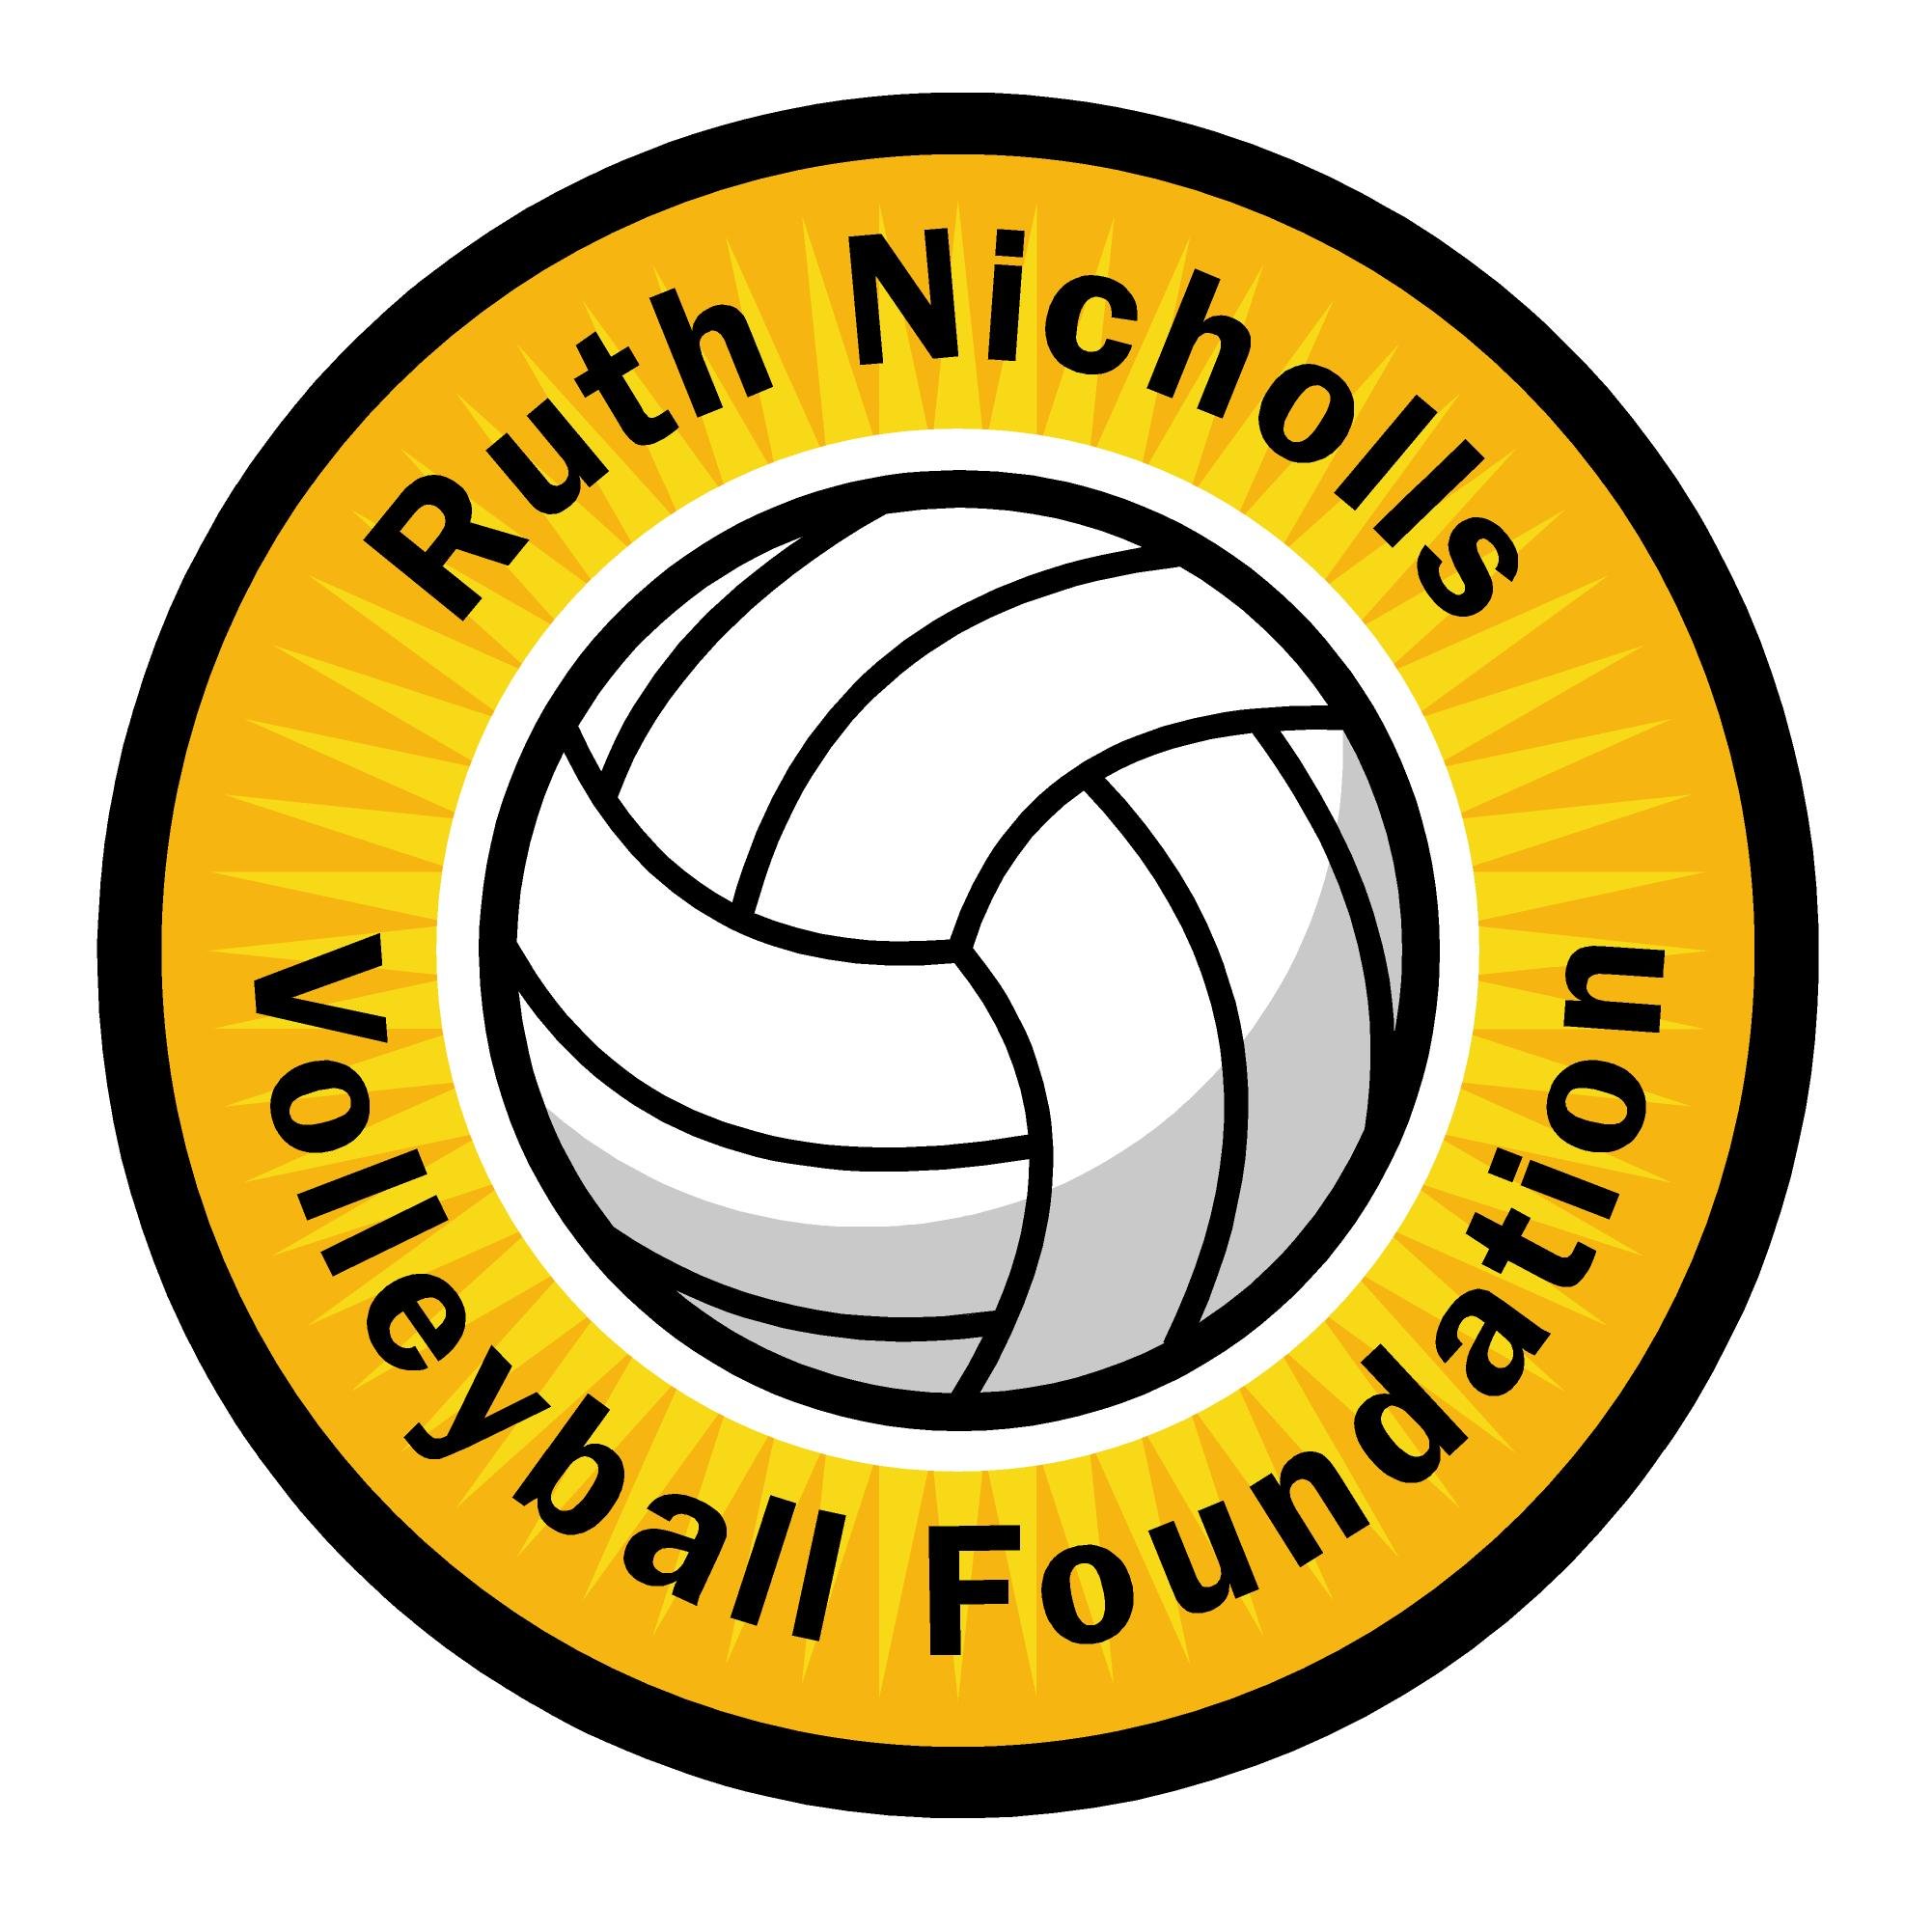 Supporting grassroots volleyball publishing coaching books and making small grants #coachingvolleyball #volleyball #trainingvolleyball